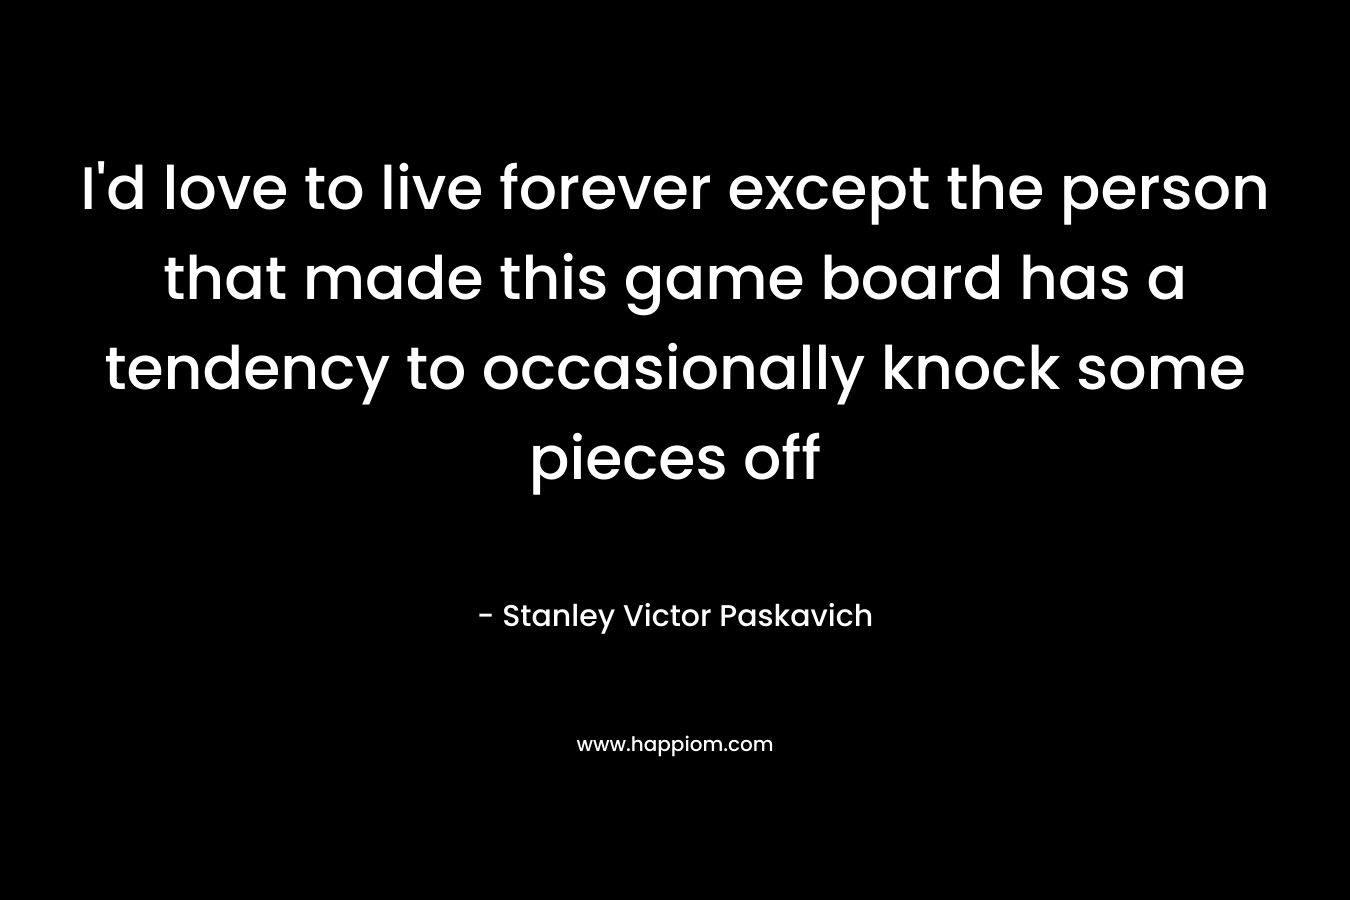 I’d love to live forever except the person that made this game board has a tendency to occasionally knock some pieces off – Stanley Victor Paskavich